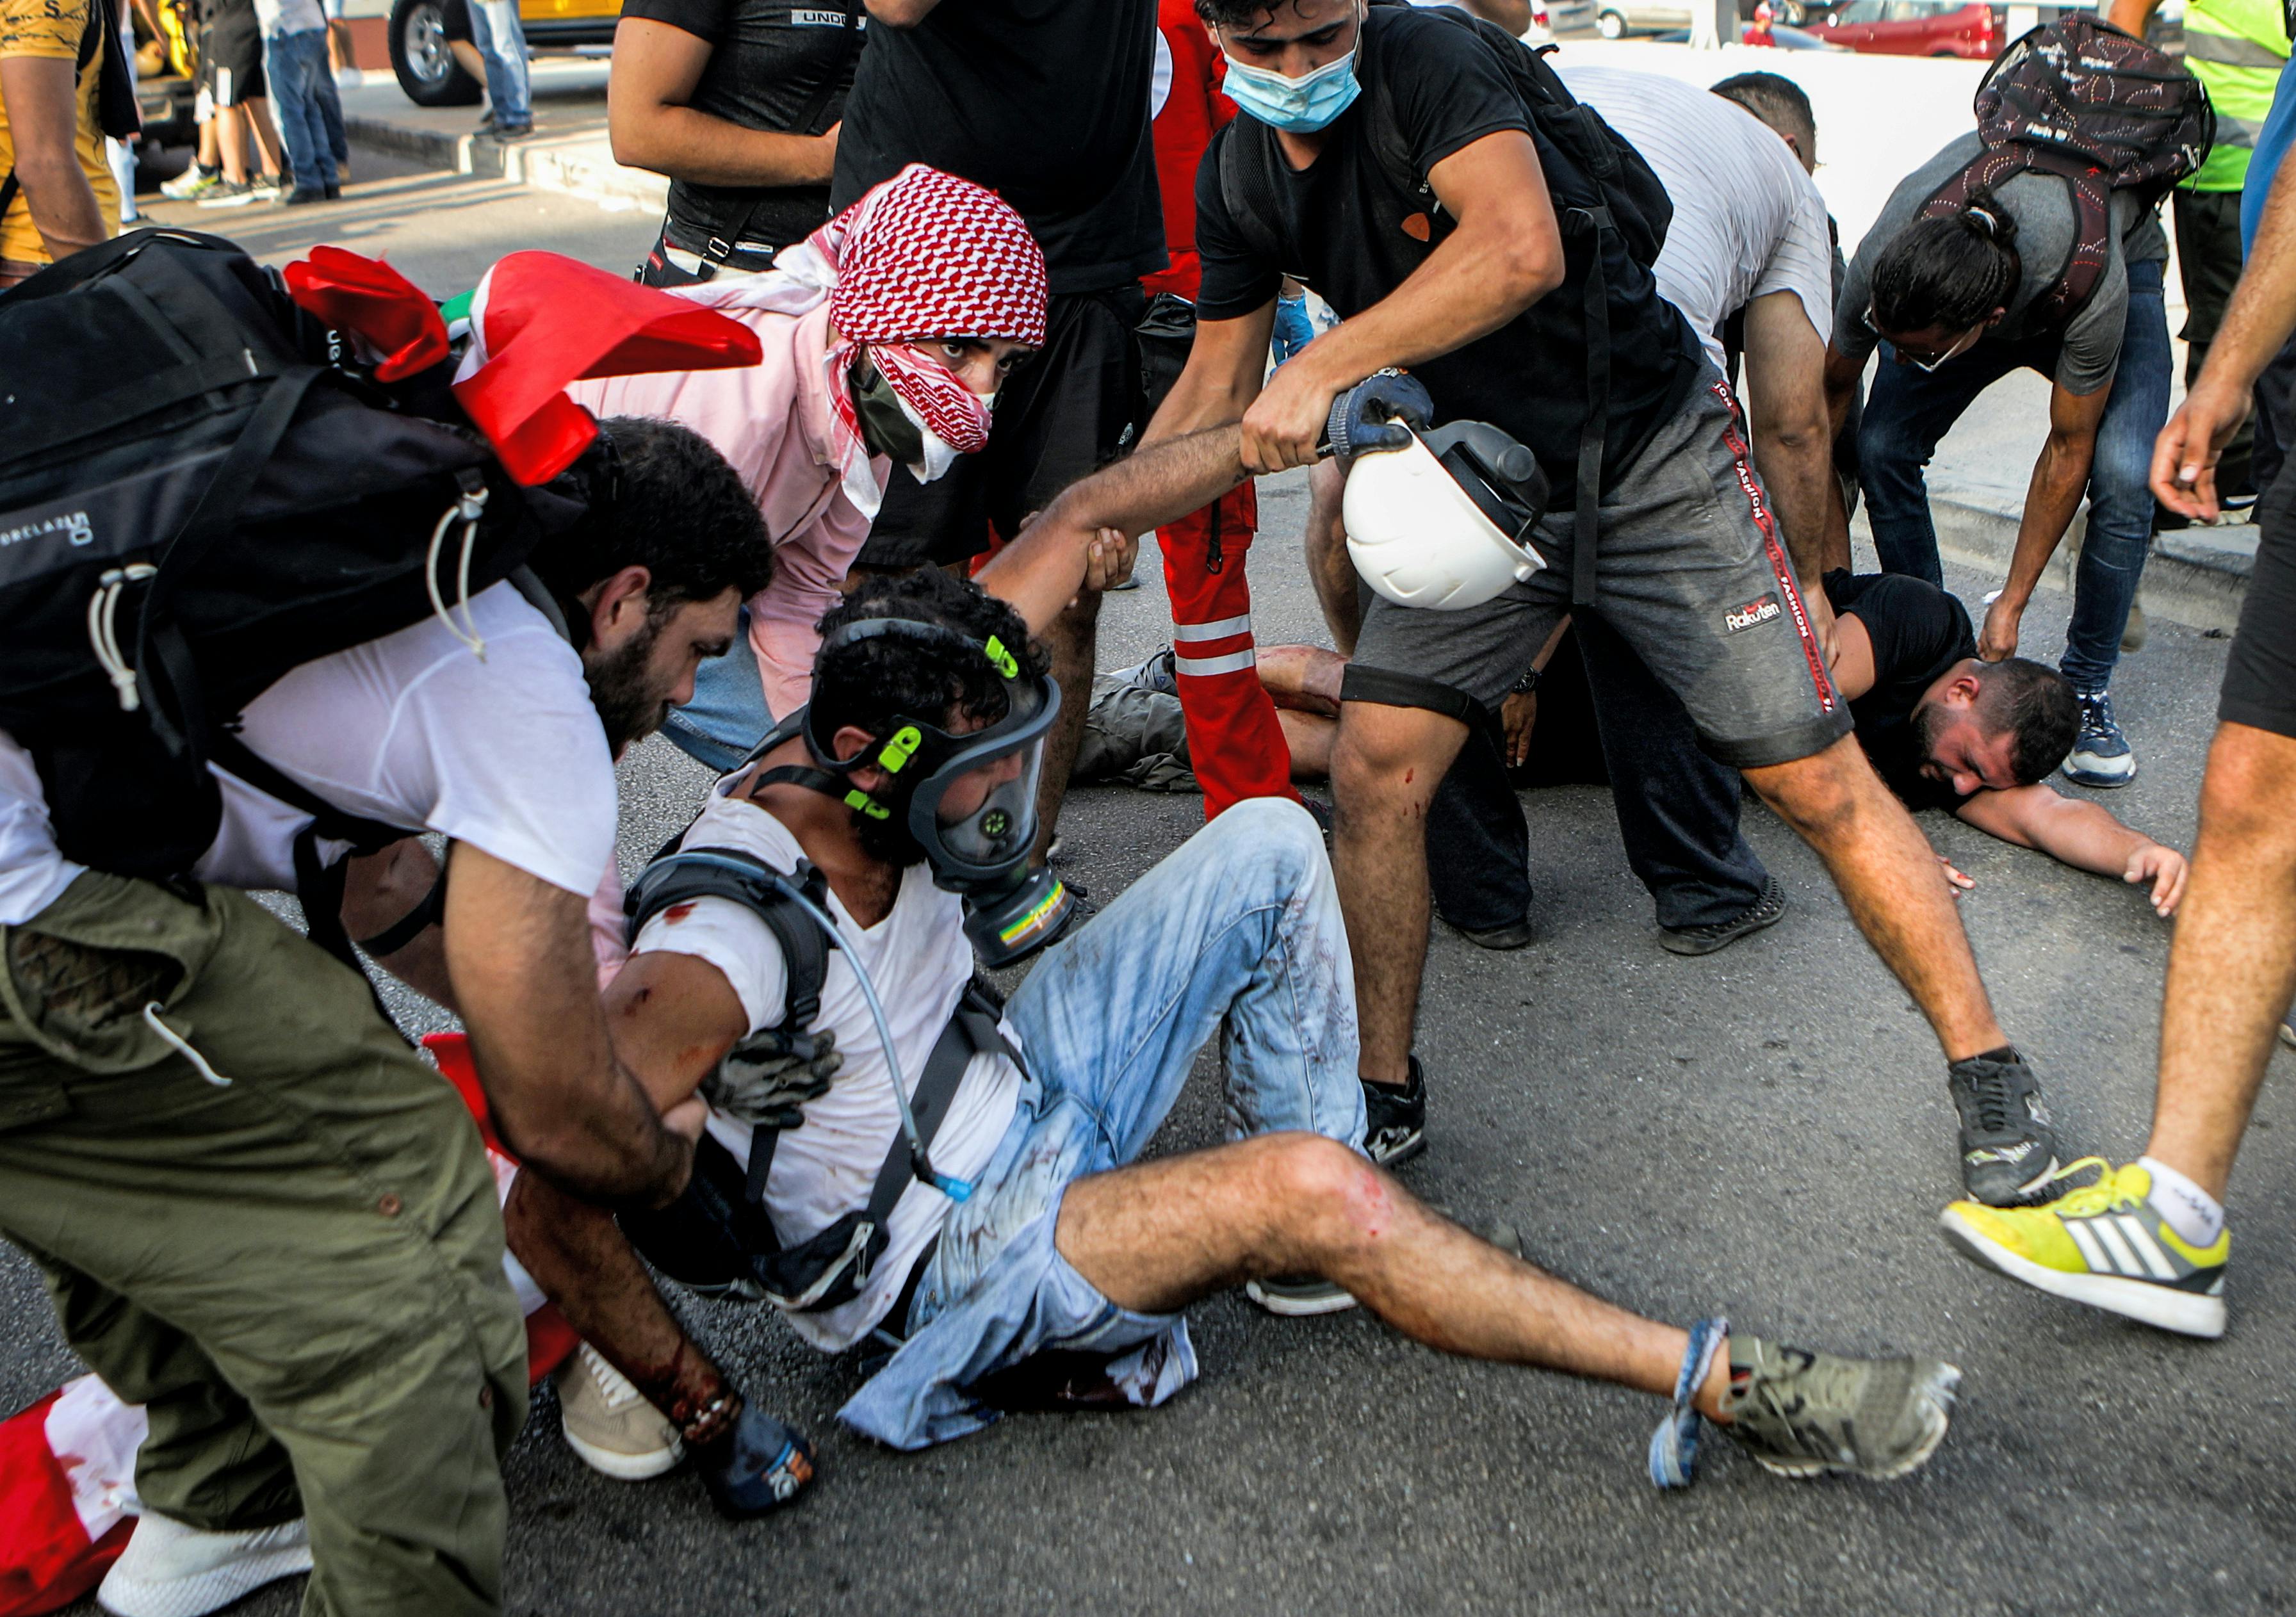 Lebanese protesters help a wounded demonstrator during clashes in downtown Beirut on August 8, 2020, following a demonstration against a political leadership they blame for a monster explosion that killed more than 150 people and disfigured the capital Beirut. 
